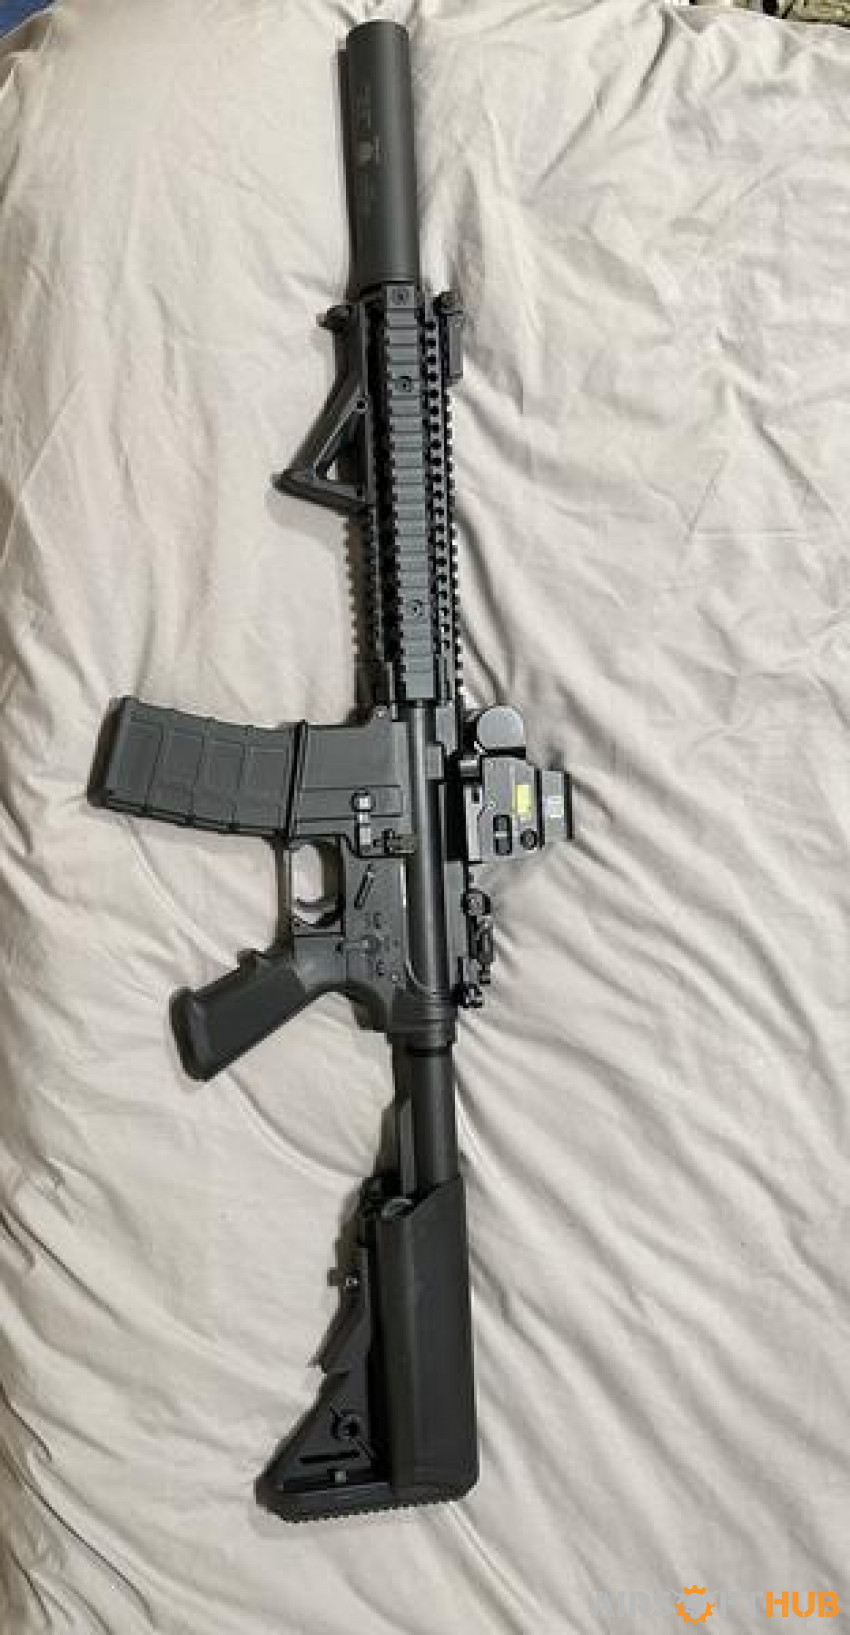 GE mk18 GBBR - Used airsoft equipment